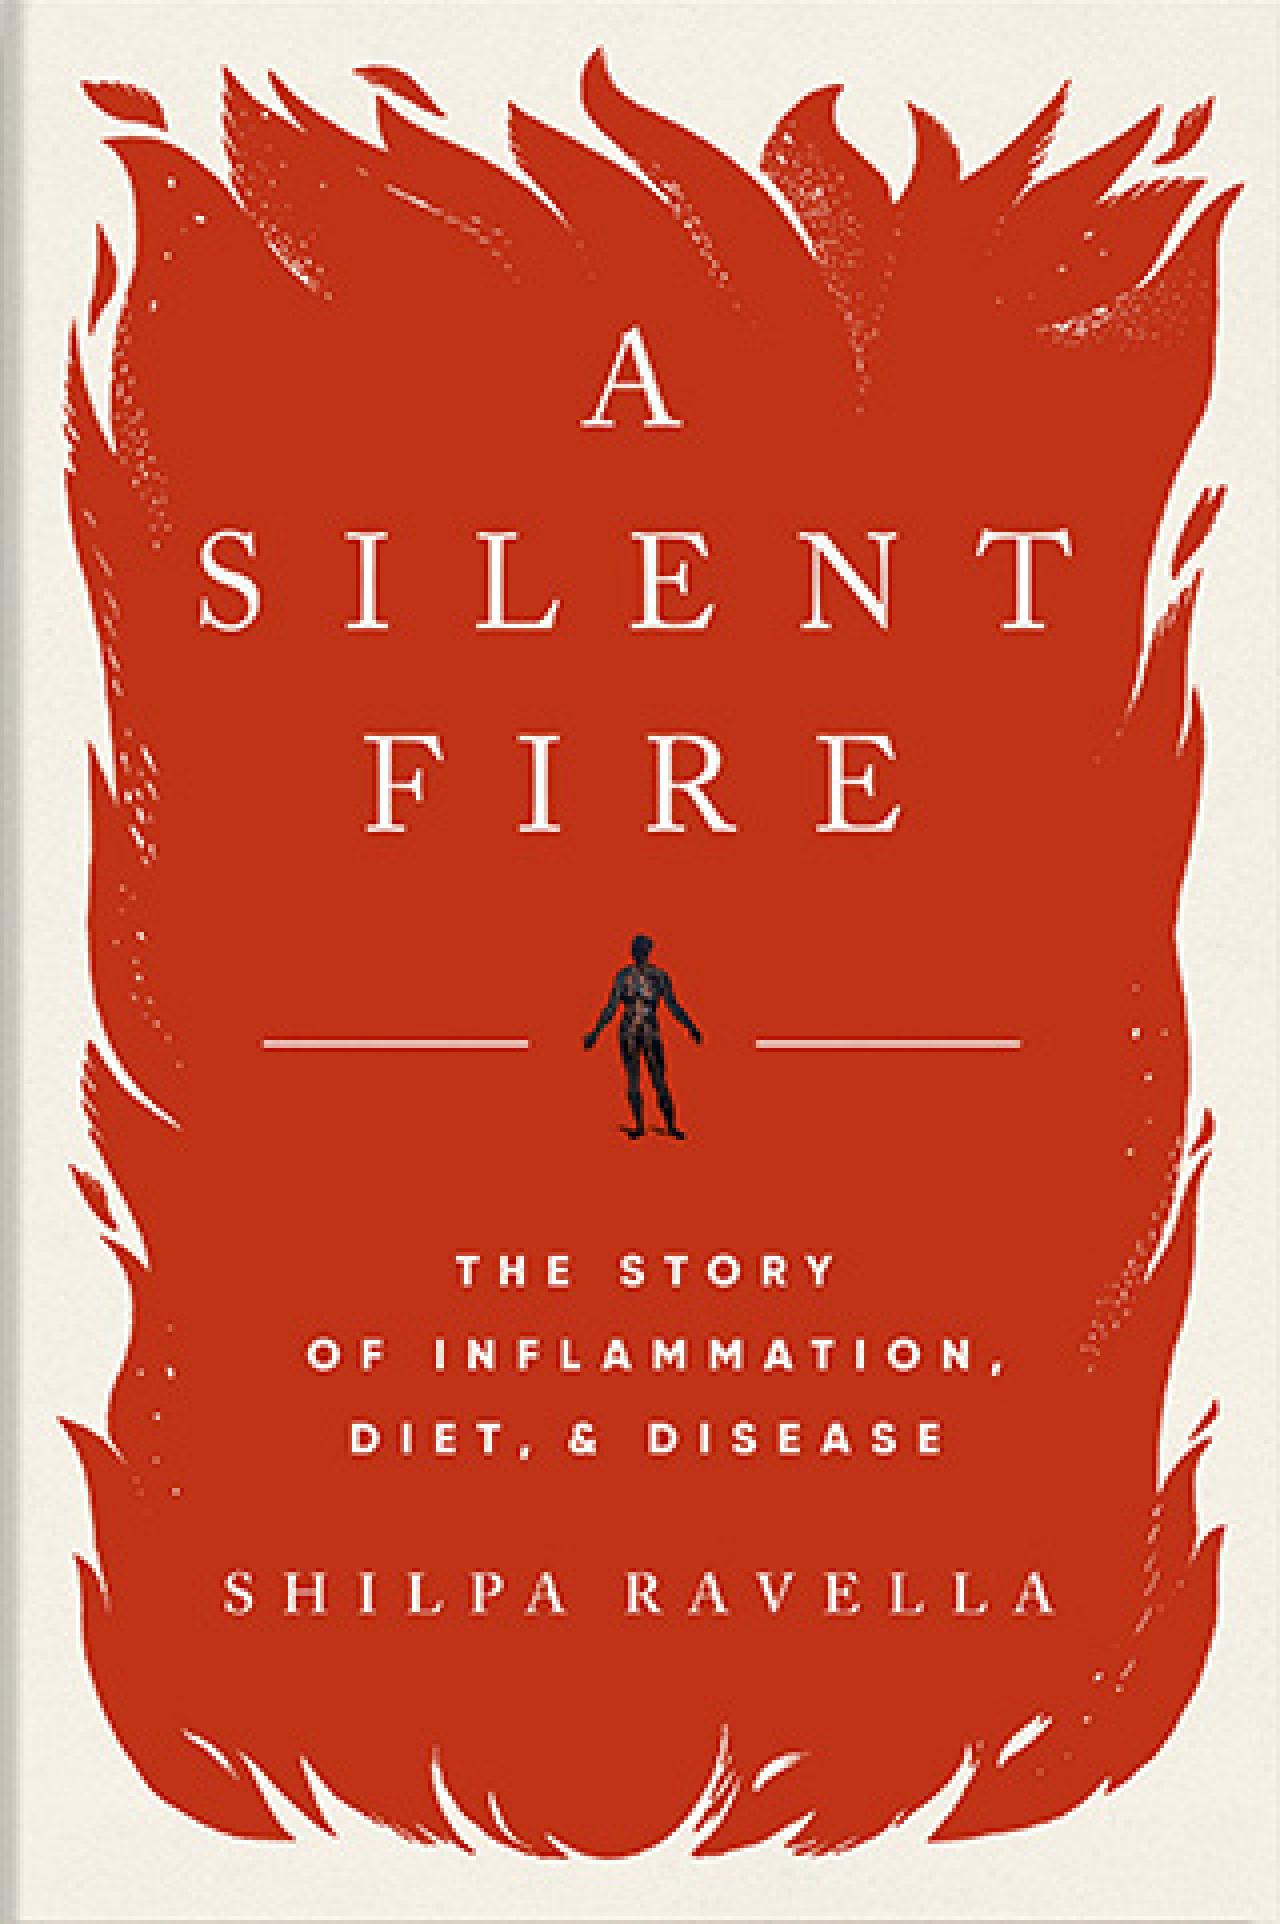 cover of book, "A Silent Fire"